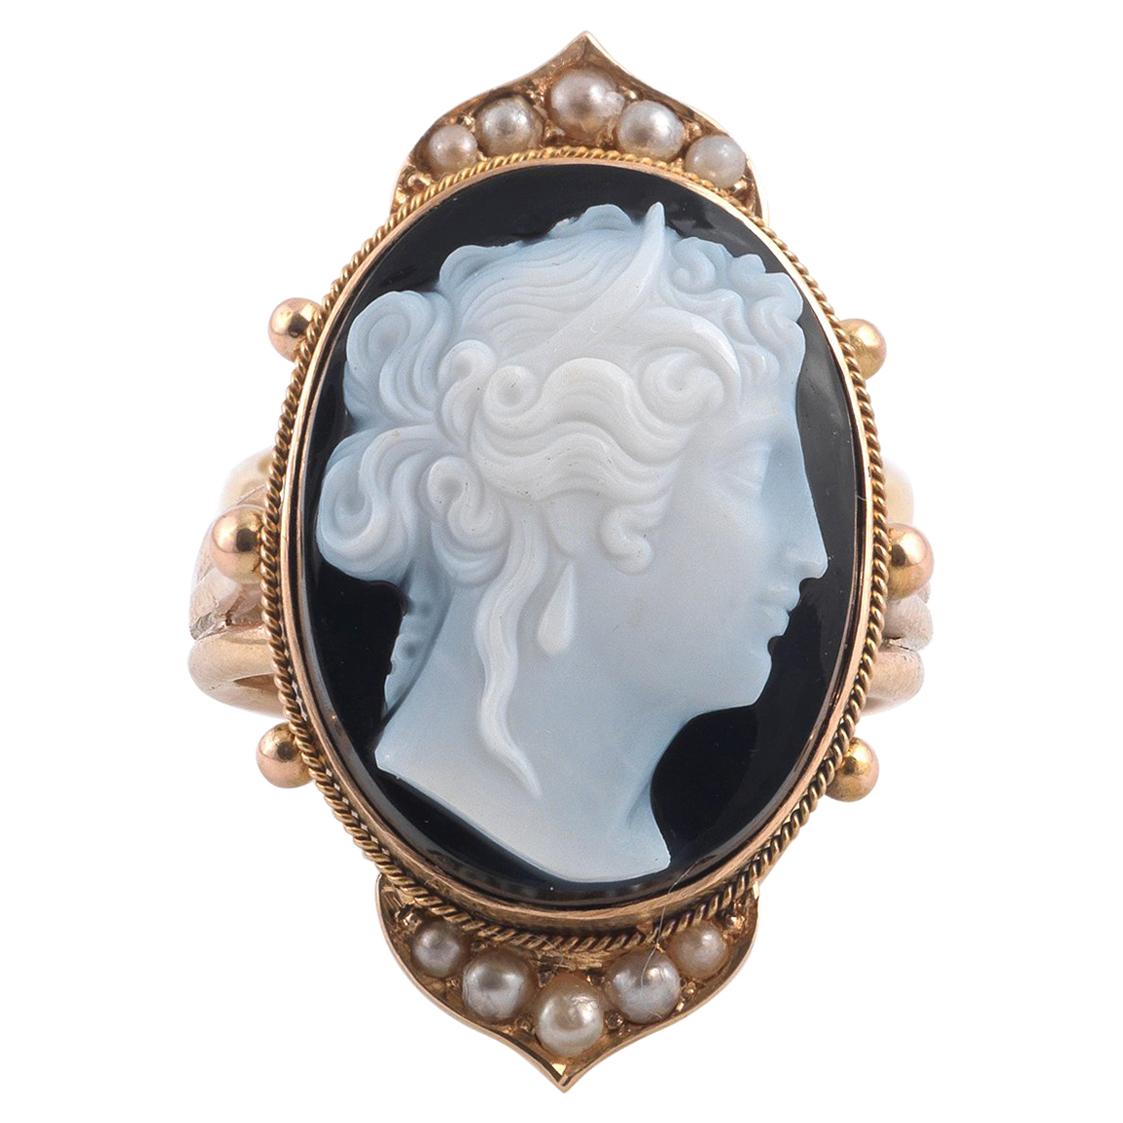 Hardstone Agate Cameo Ring